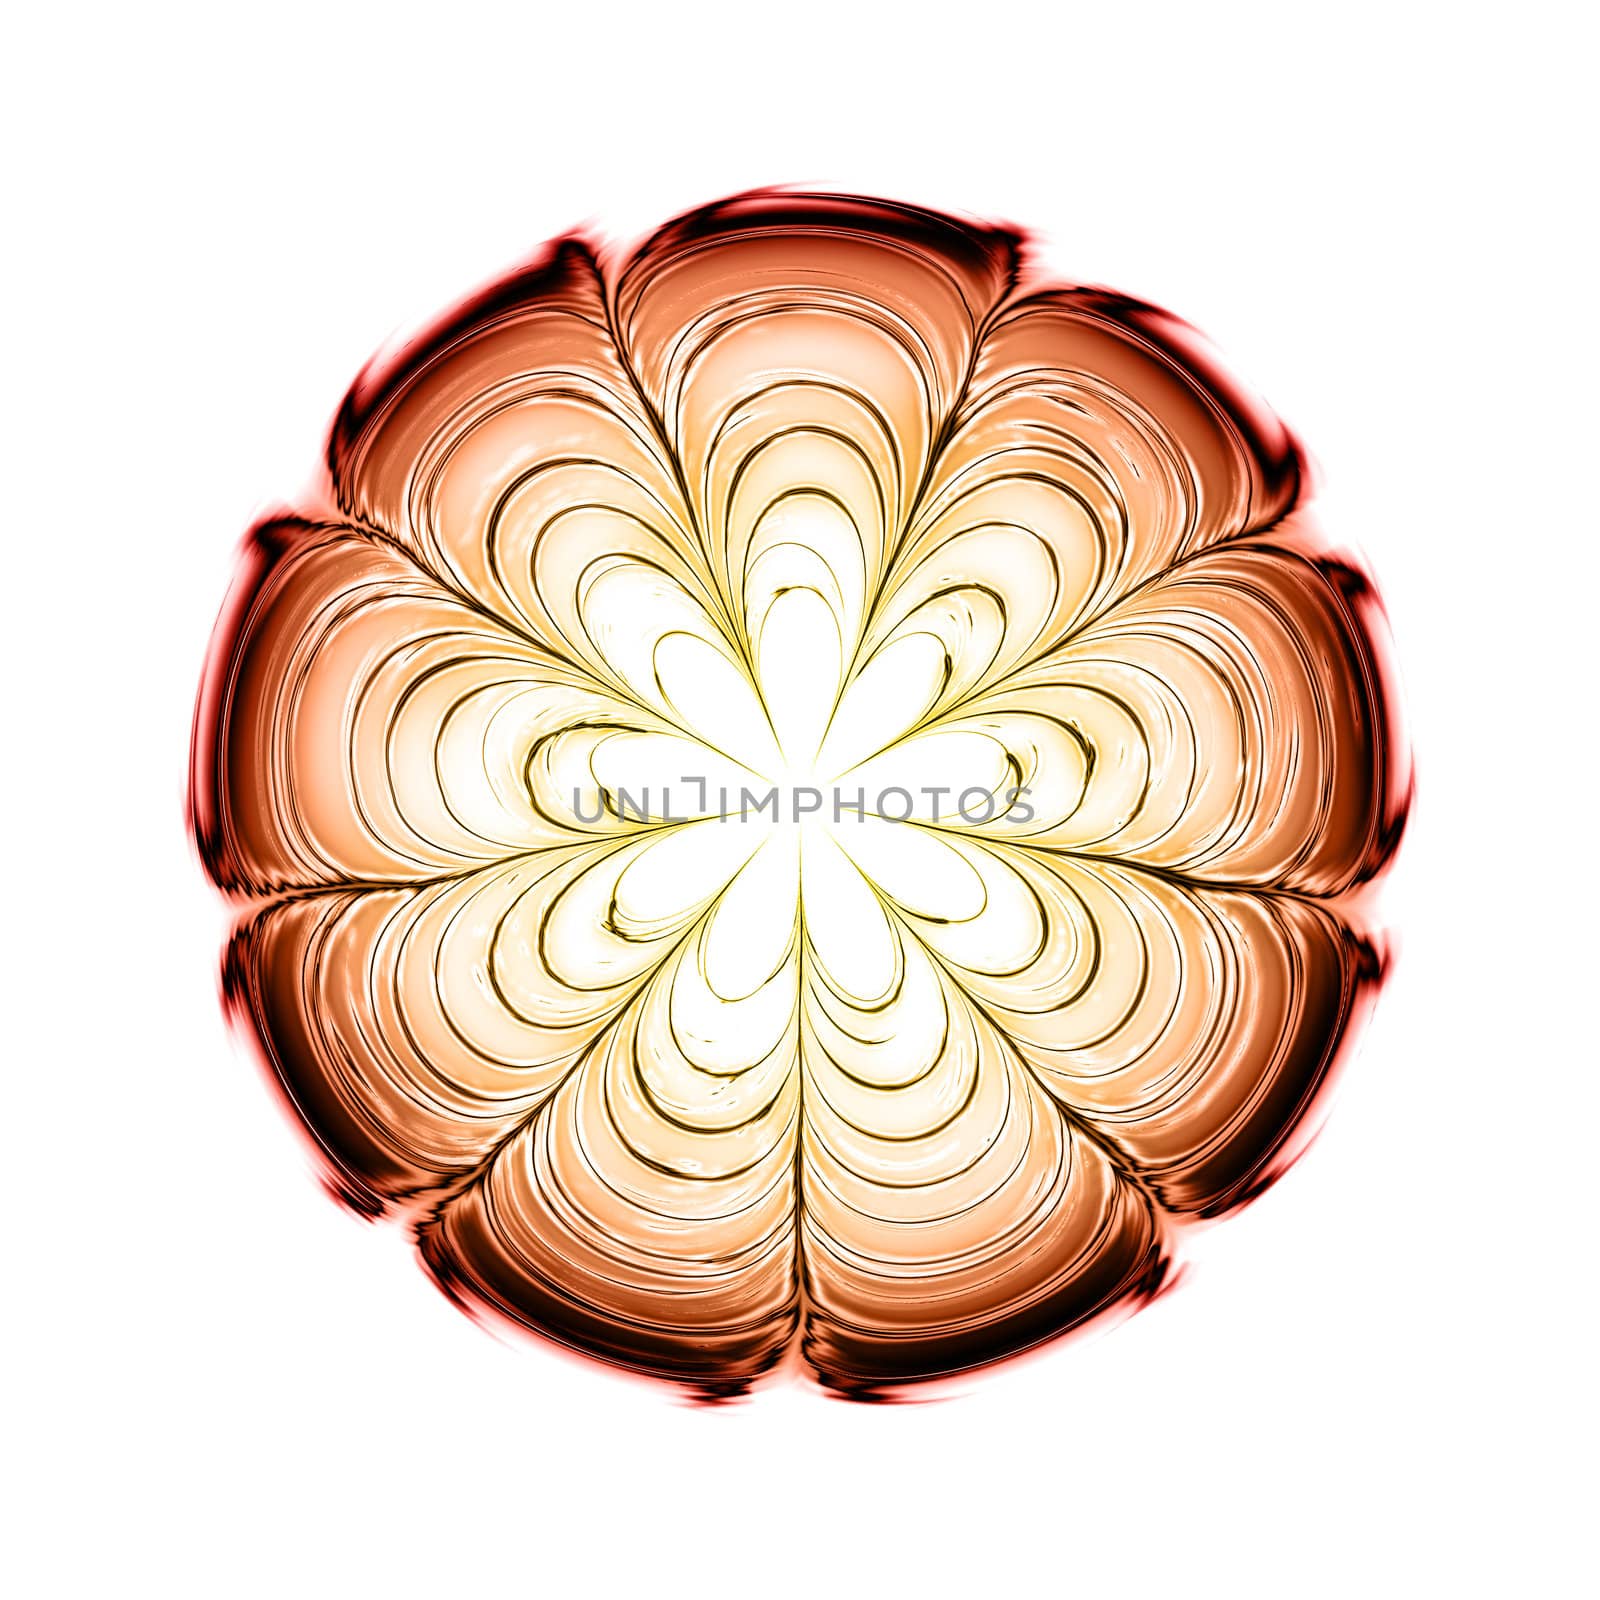 An image of a nice abstract red flower